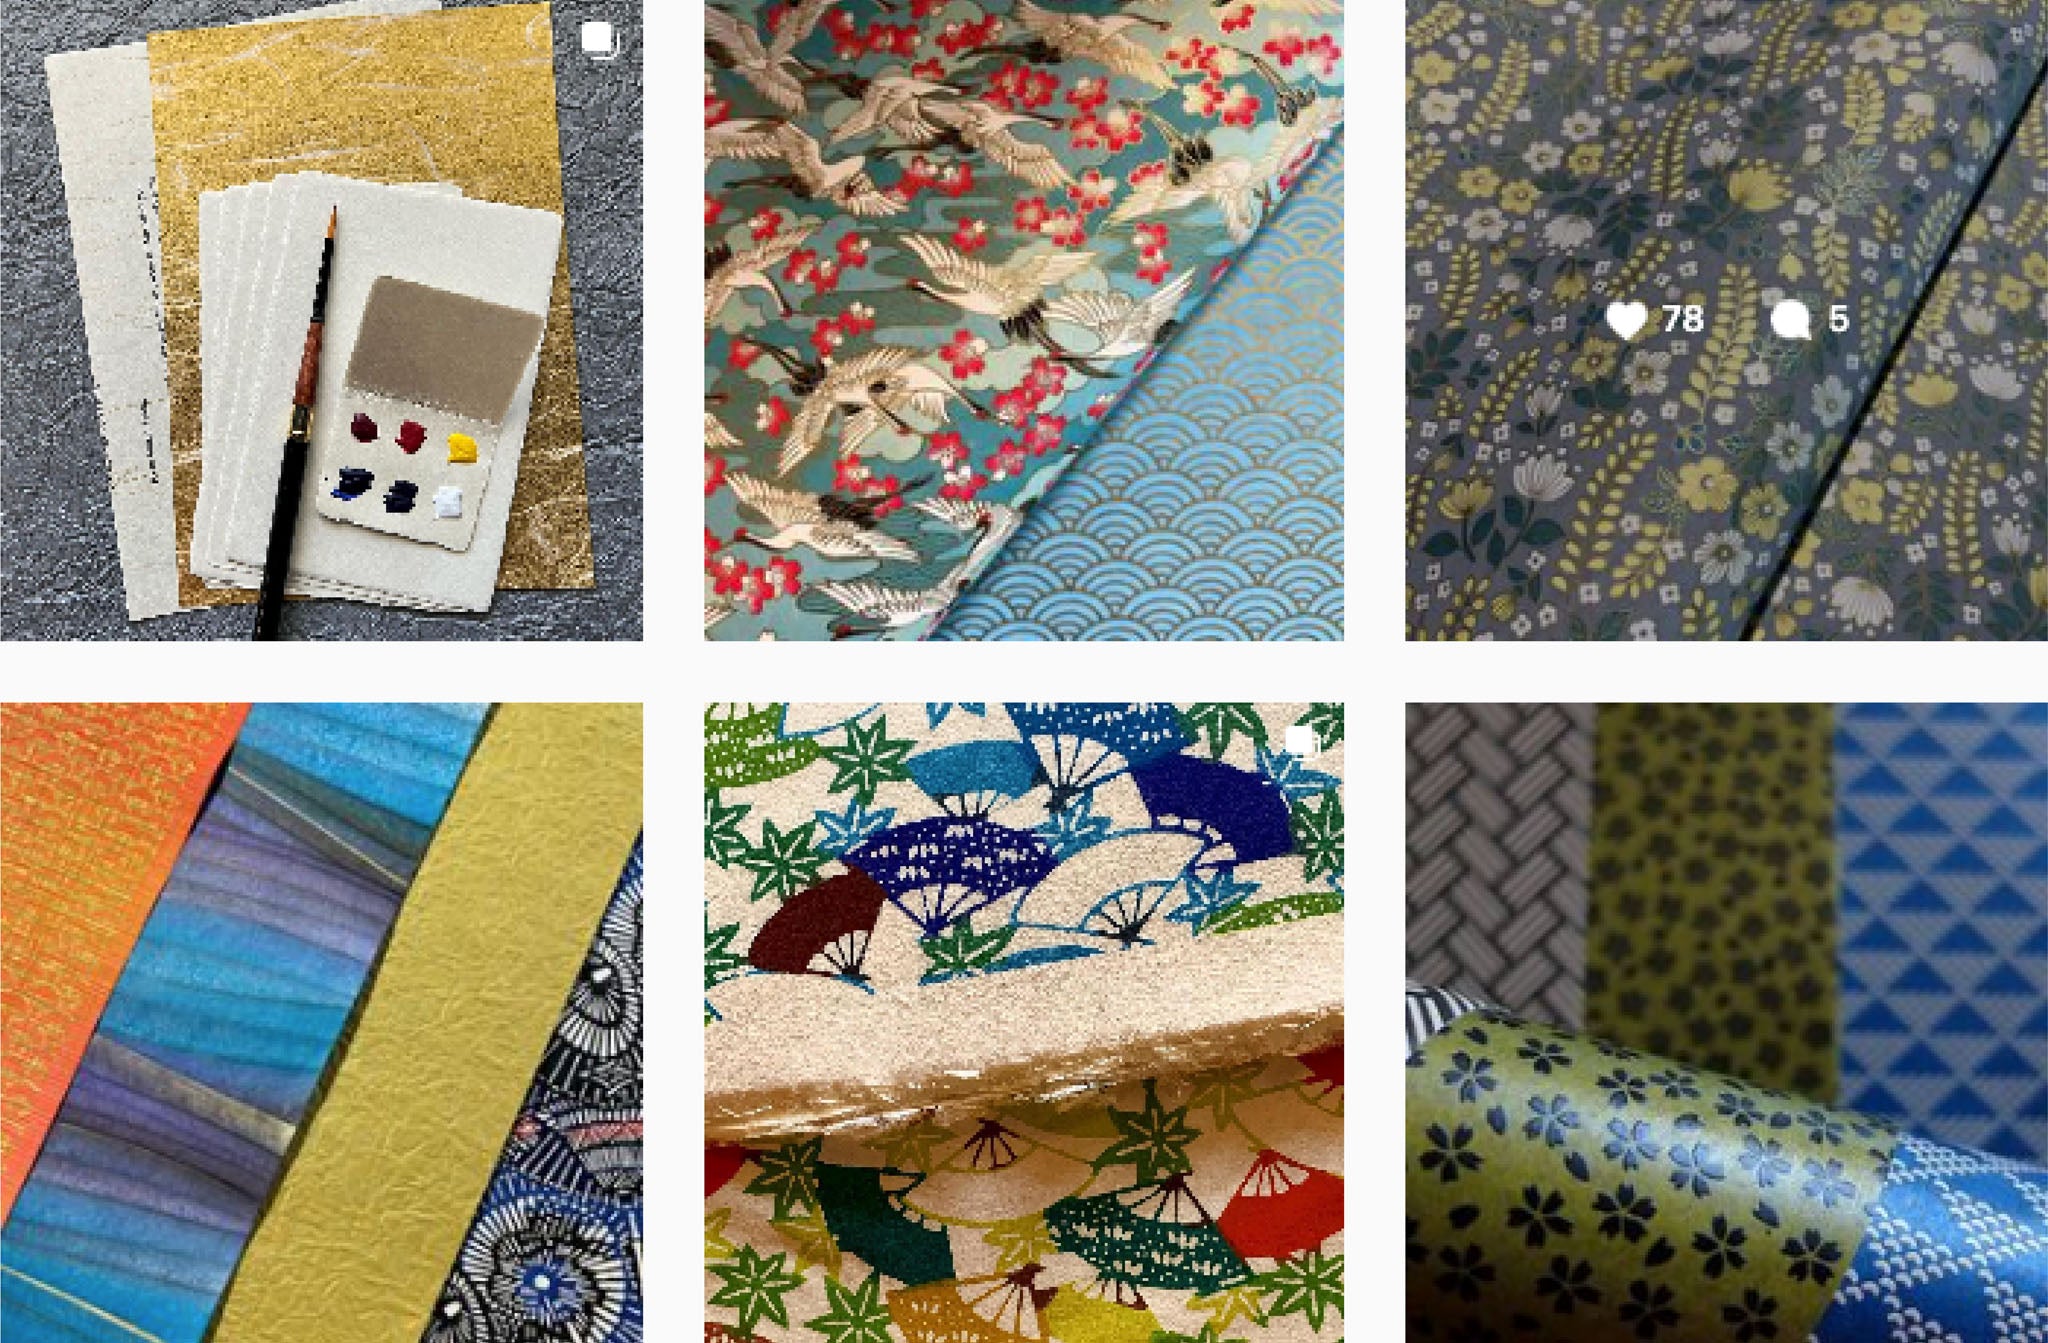 Instagram page for Washi, an exquisite paper store in Tokyo, Japan